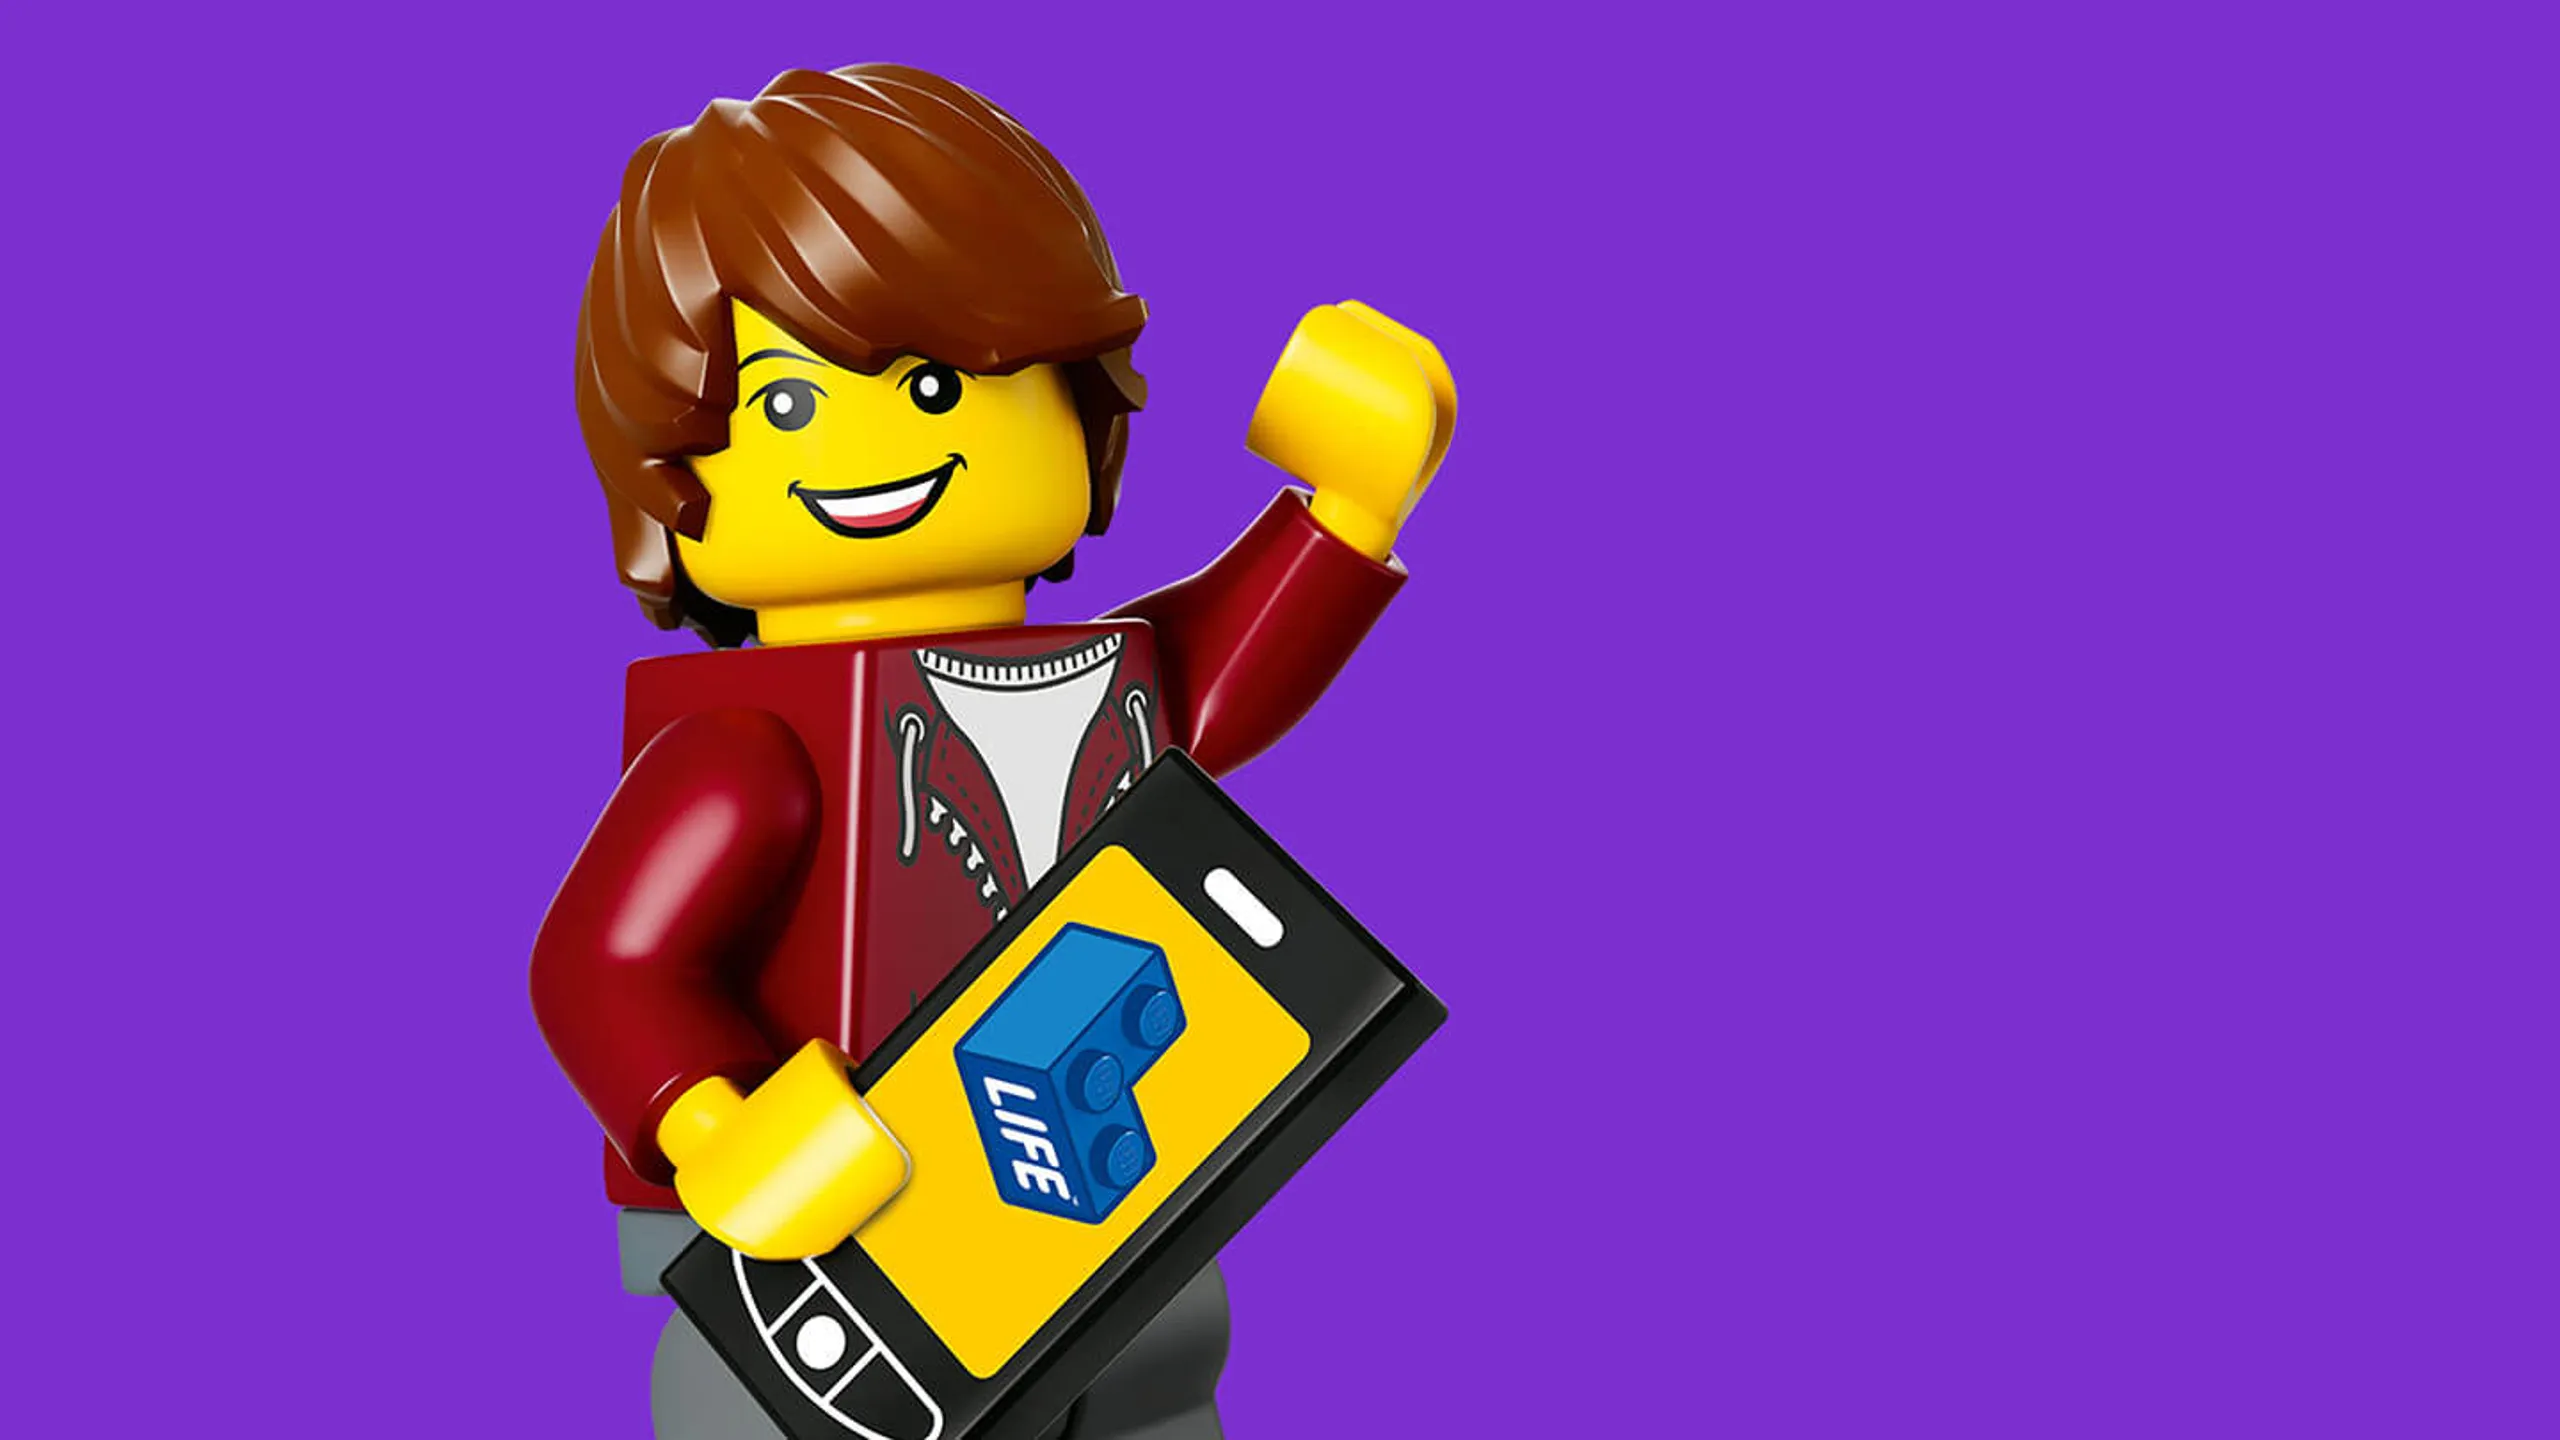 Join in the fun, with the LEGO Life app!